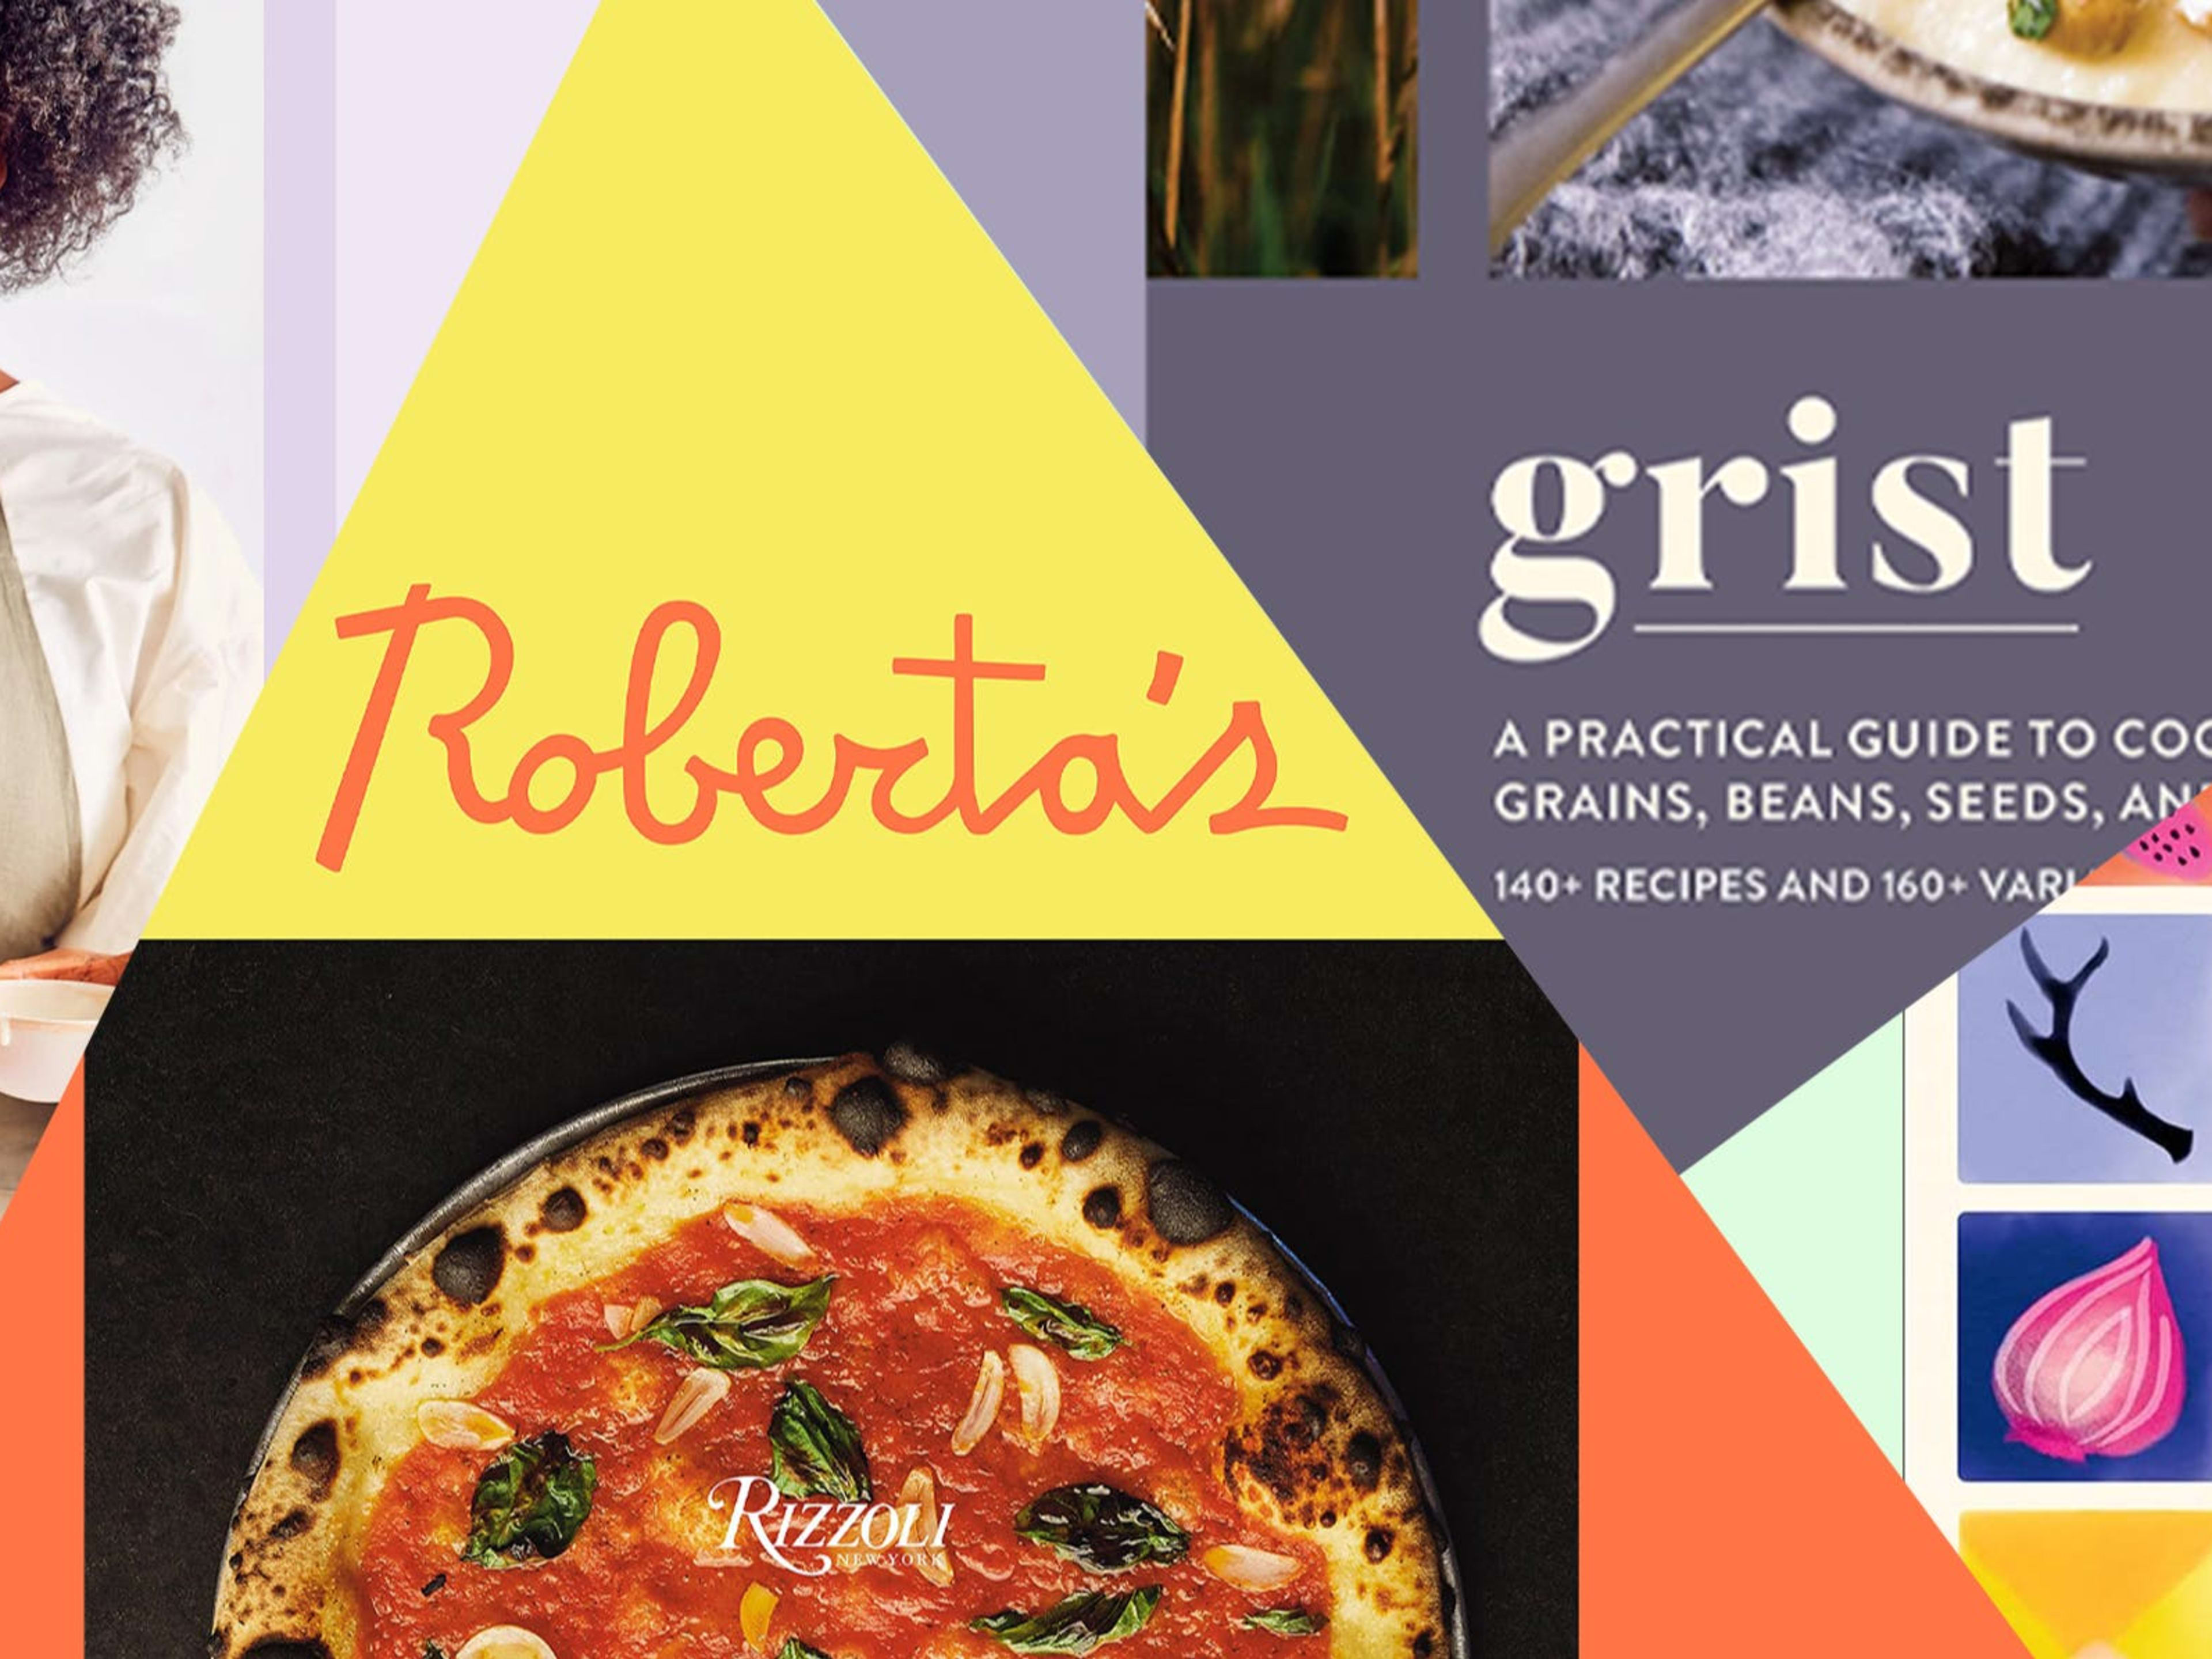 These Are The Best, Most Exciting Cookbooks Coming Out This Fall image